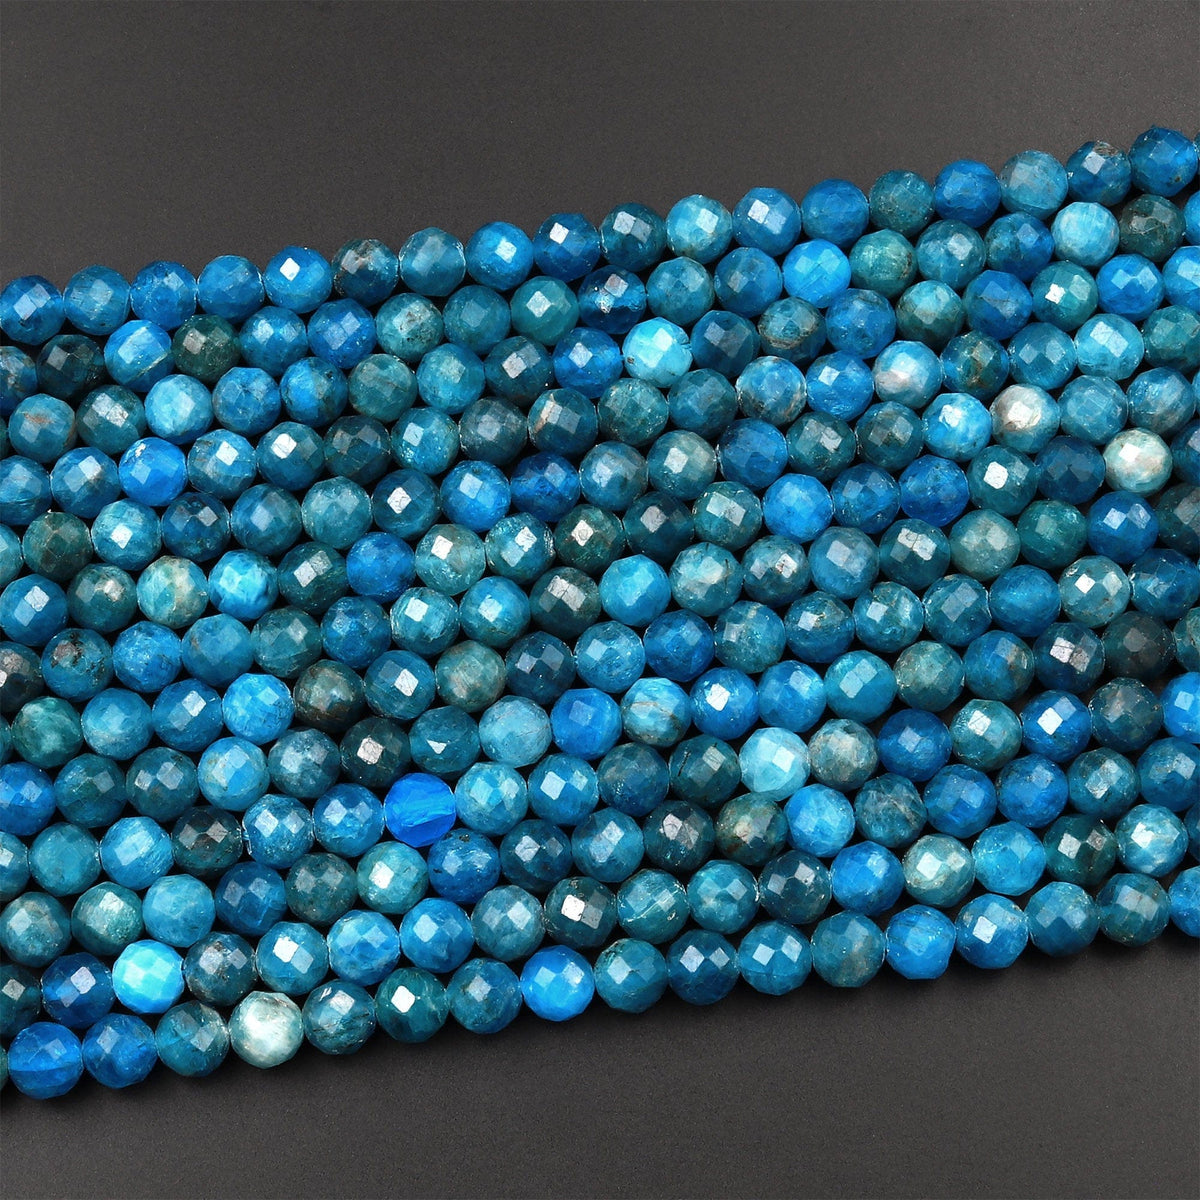 4mm Round Glass Beads - Opaque Turquoise - 100 Beads